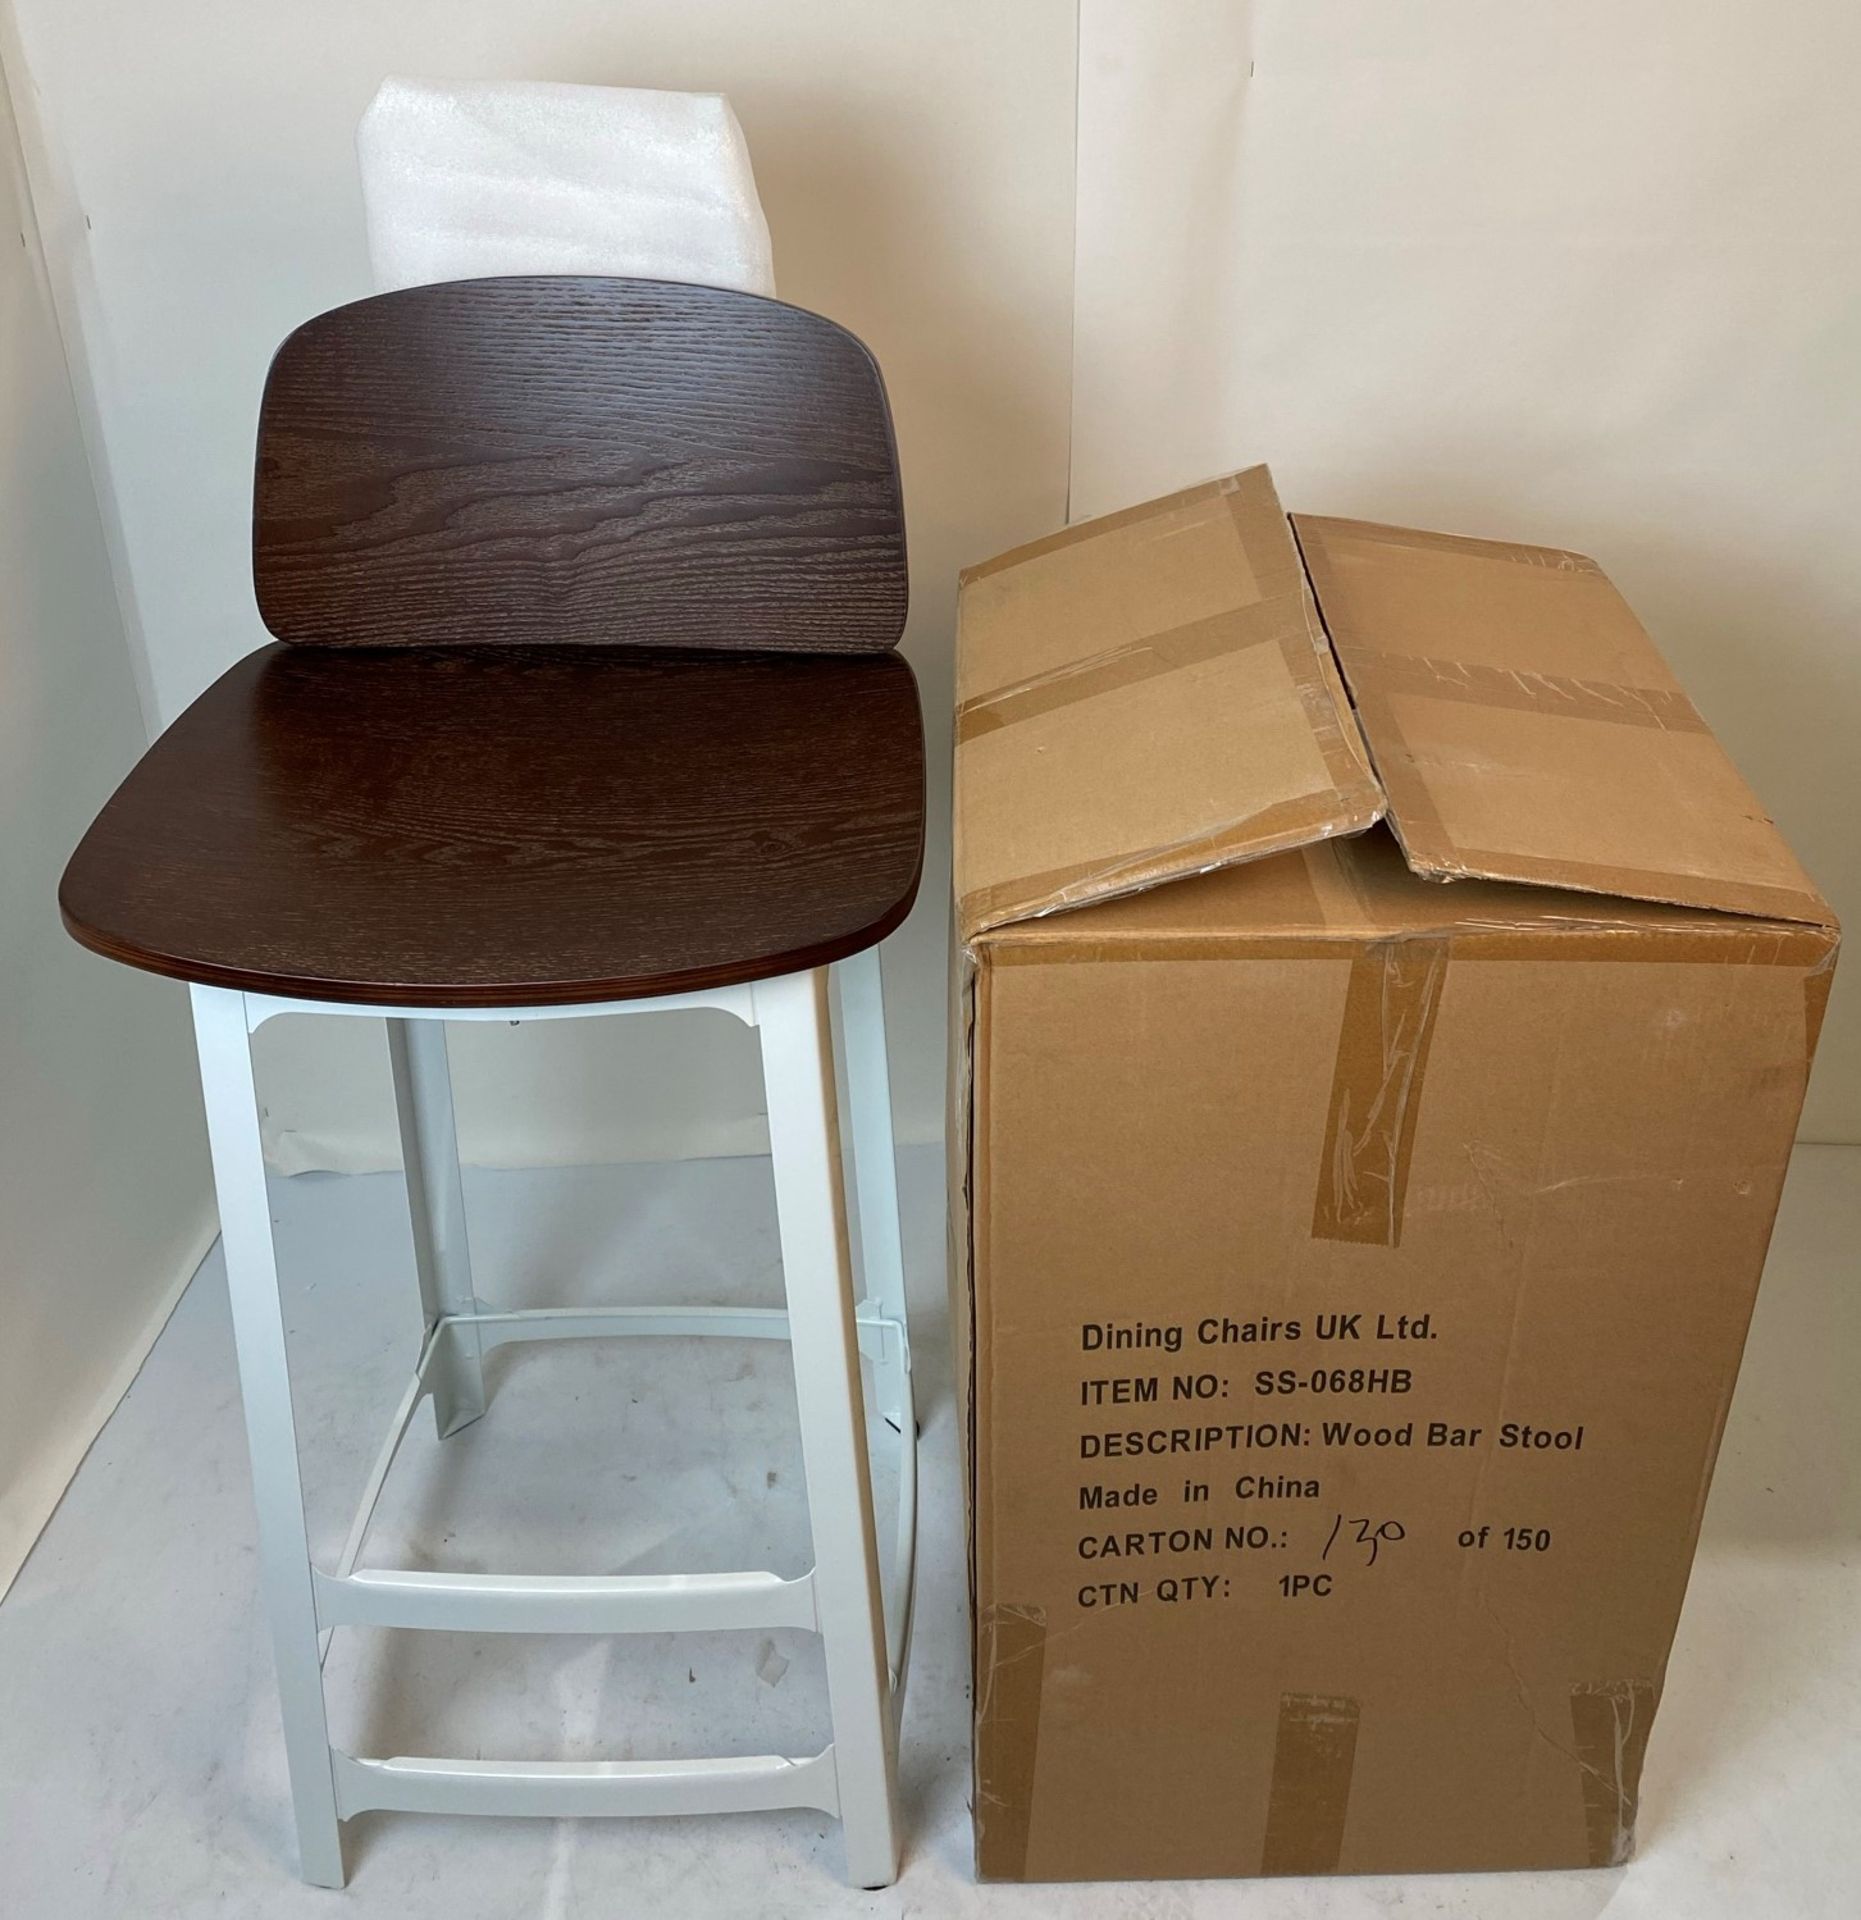 A white metal Dart high bar stool with wooden seat and back rest - Image 3 of 6